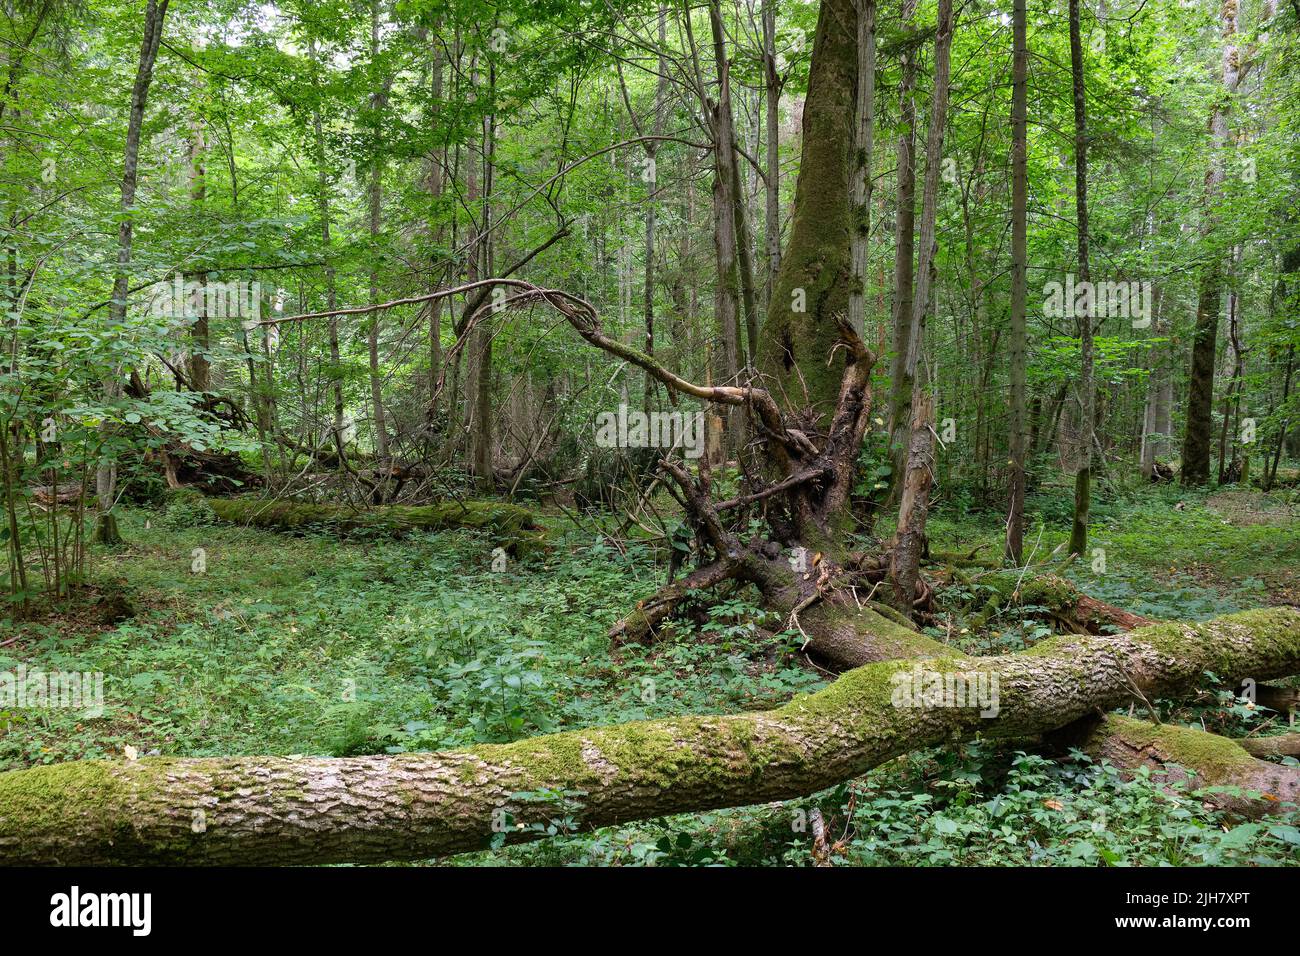 Broken old spruce tree and old linden tree in background in summertime deciduous tree stand, Bialowieza Forest, Poland, Europe Stock Photo